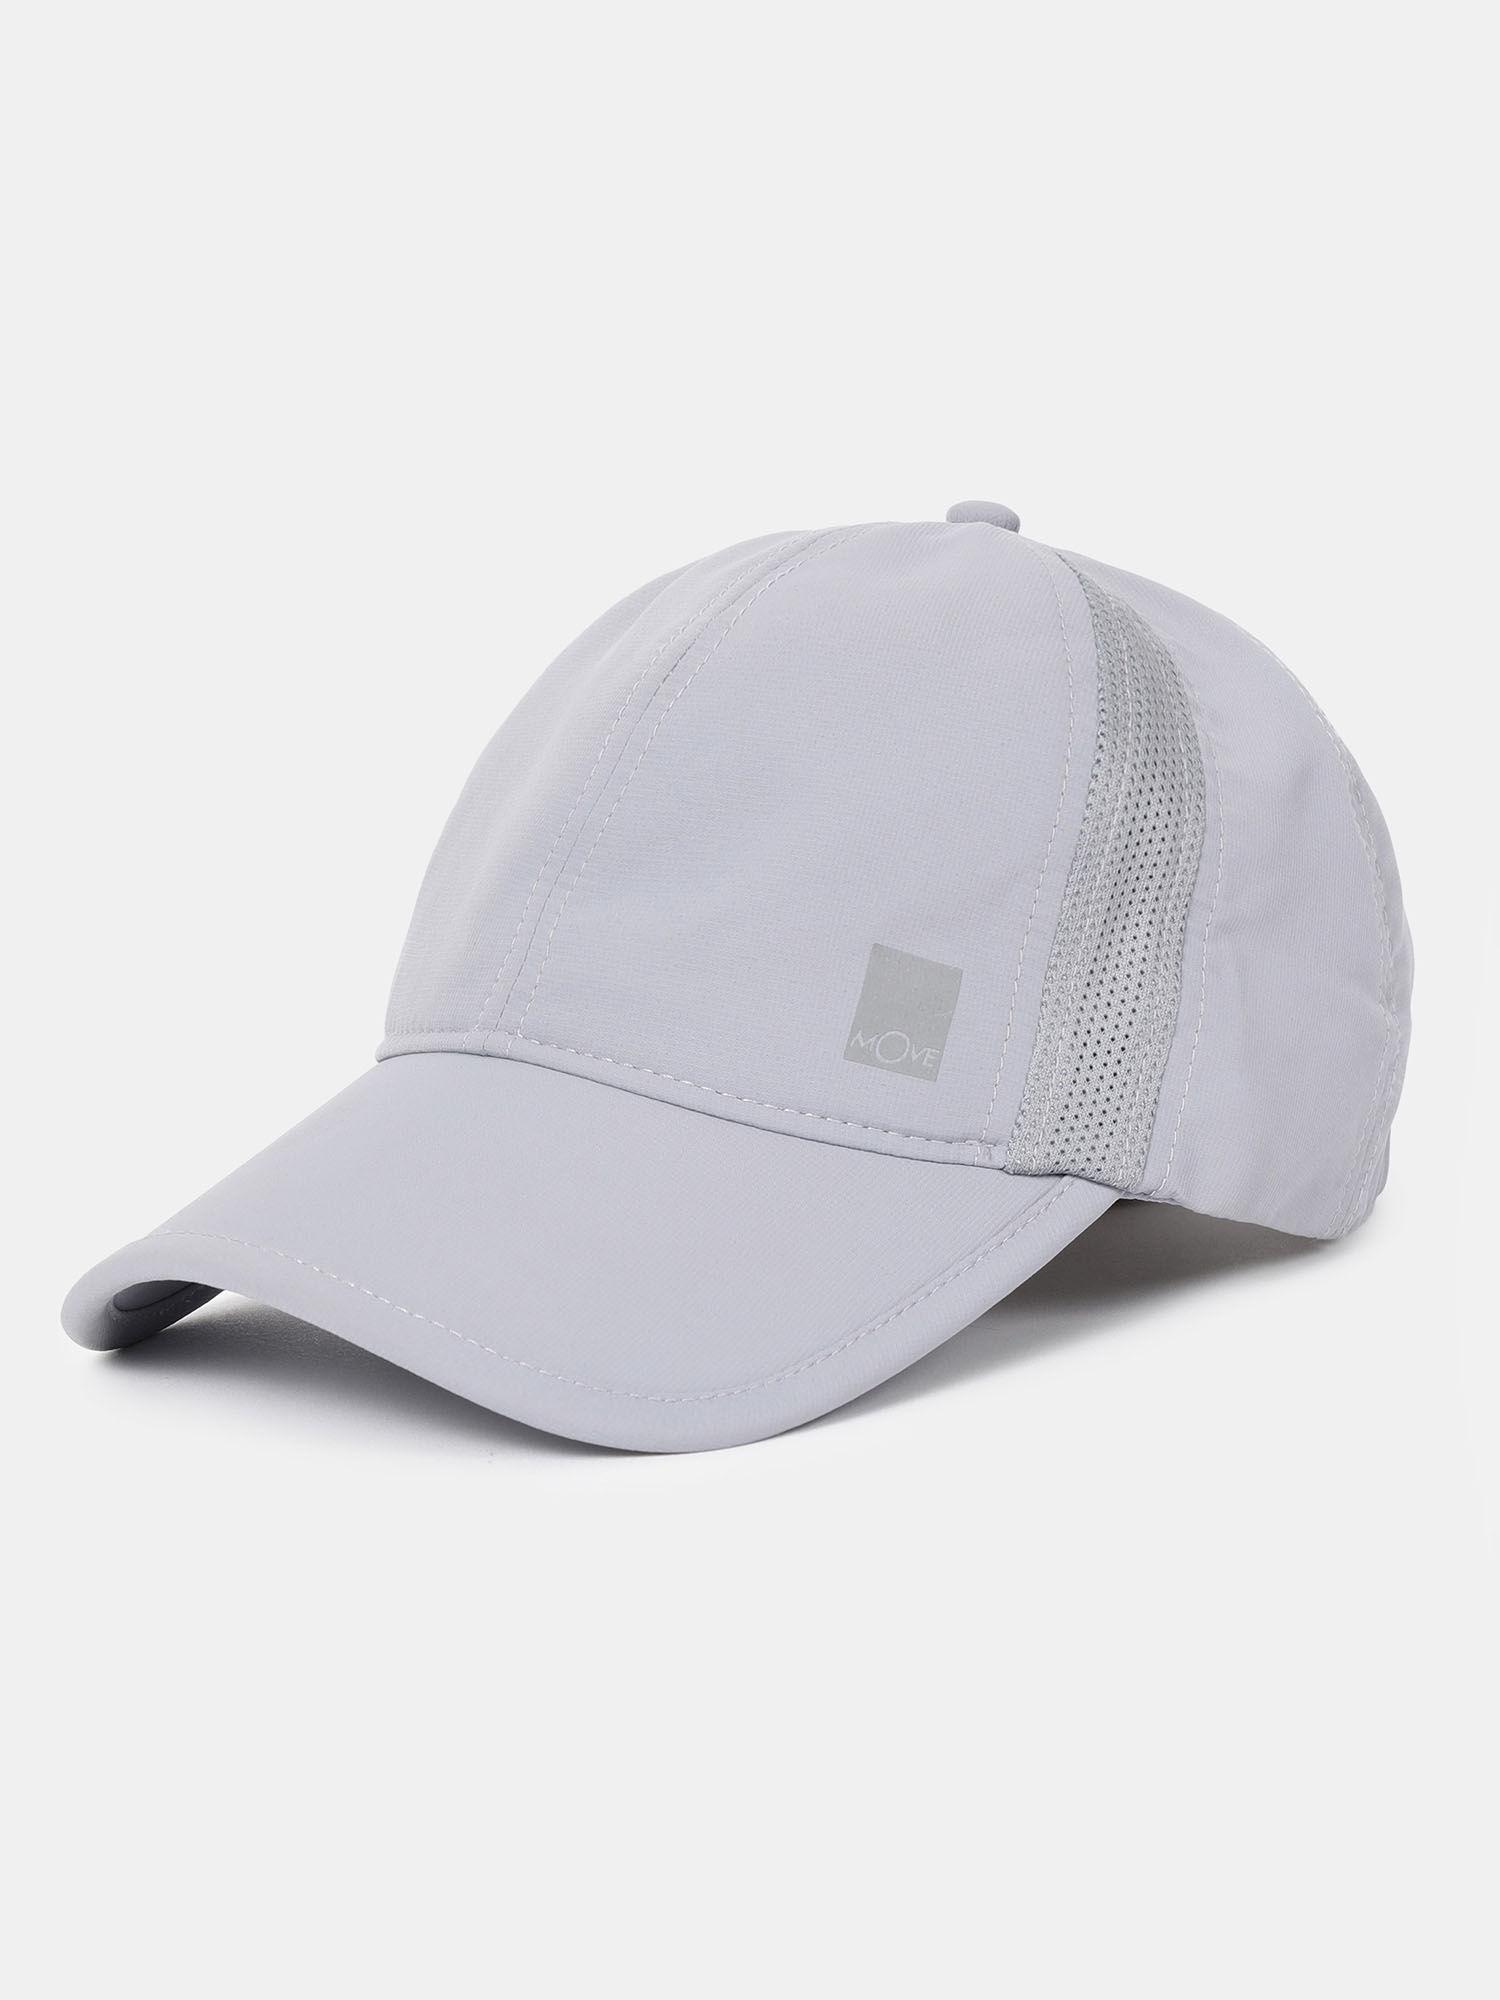 cp21 polyester solid cap with adjustable back closure and stay dry light grey